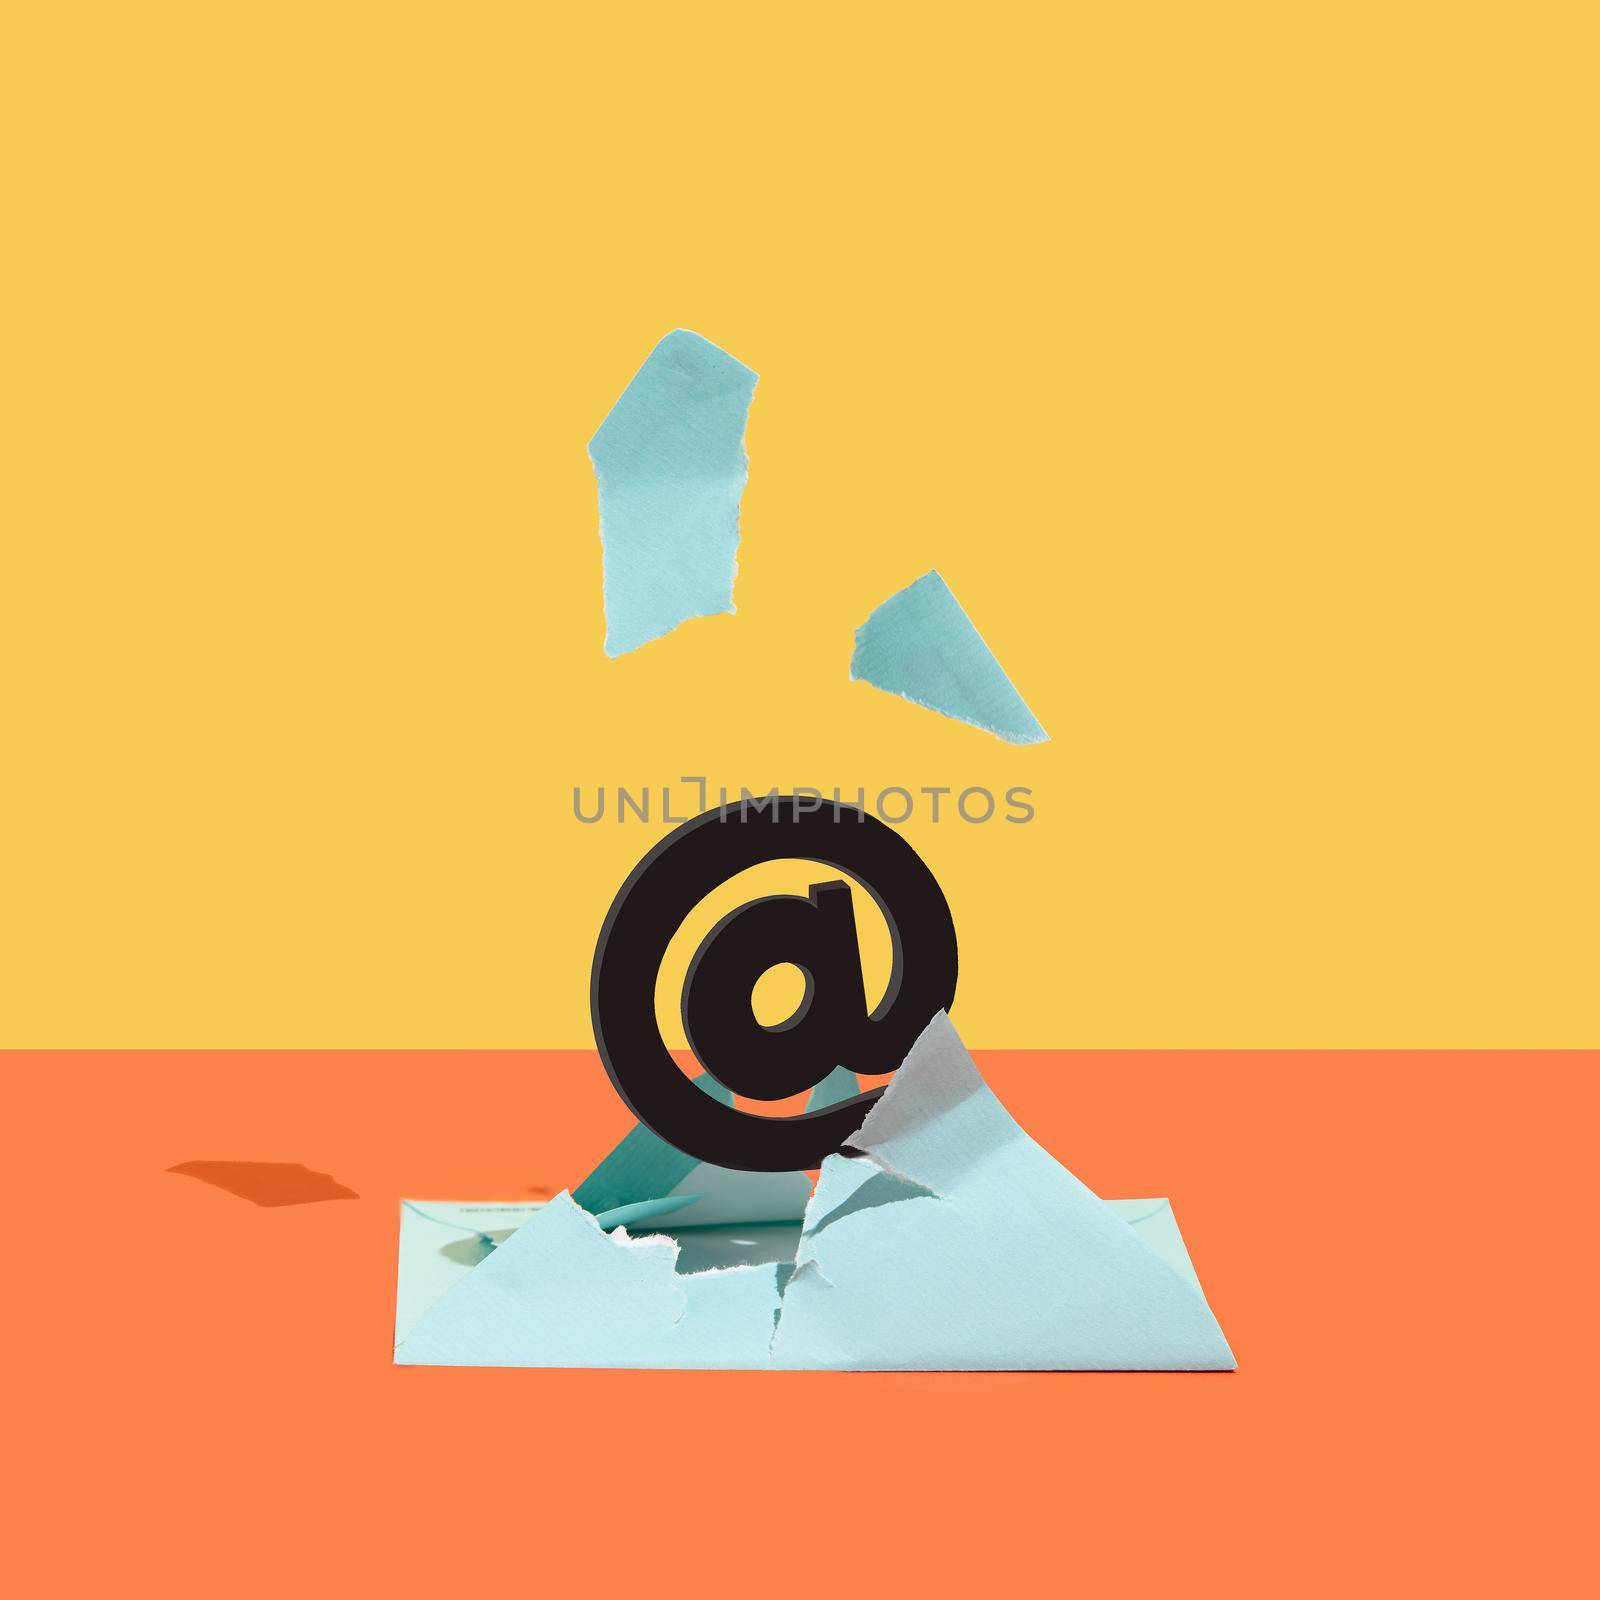 At, email sign, burst out of a blue envelope against orange and yellow background. Minimal concept. Square with copy space.